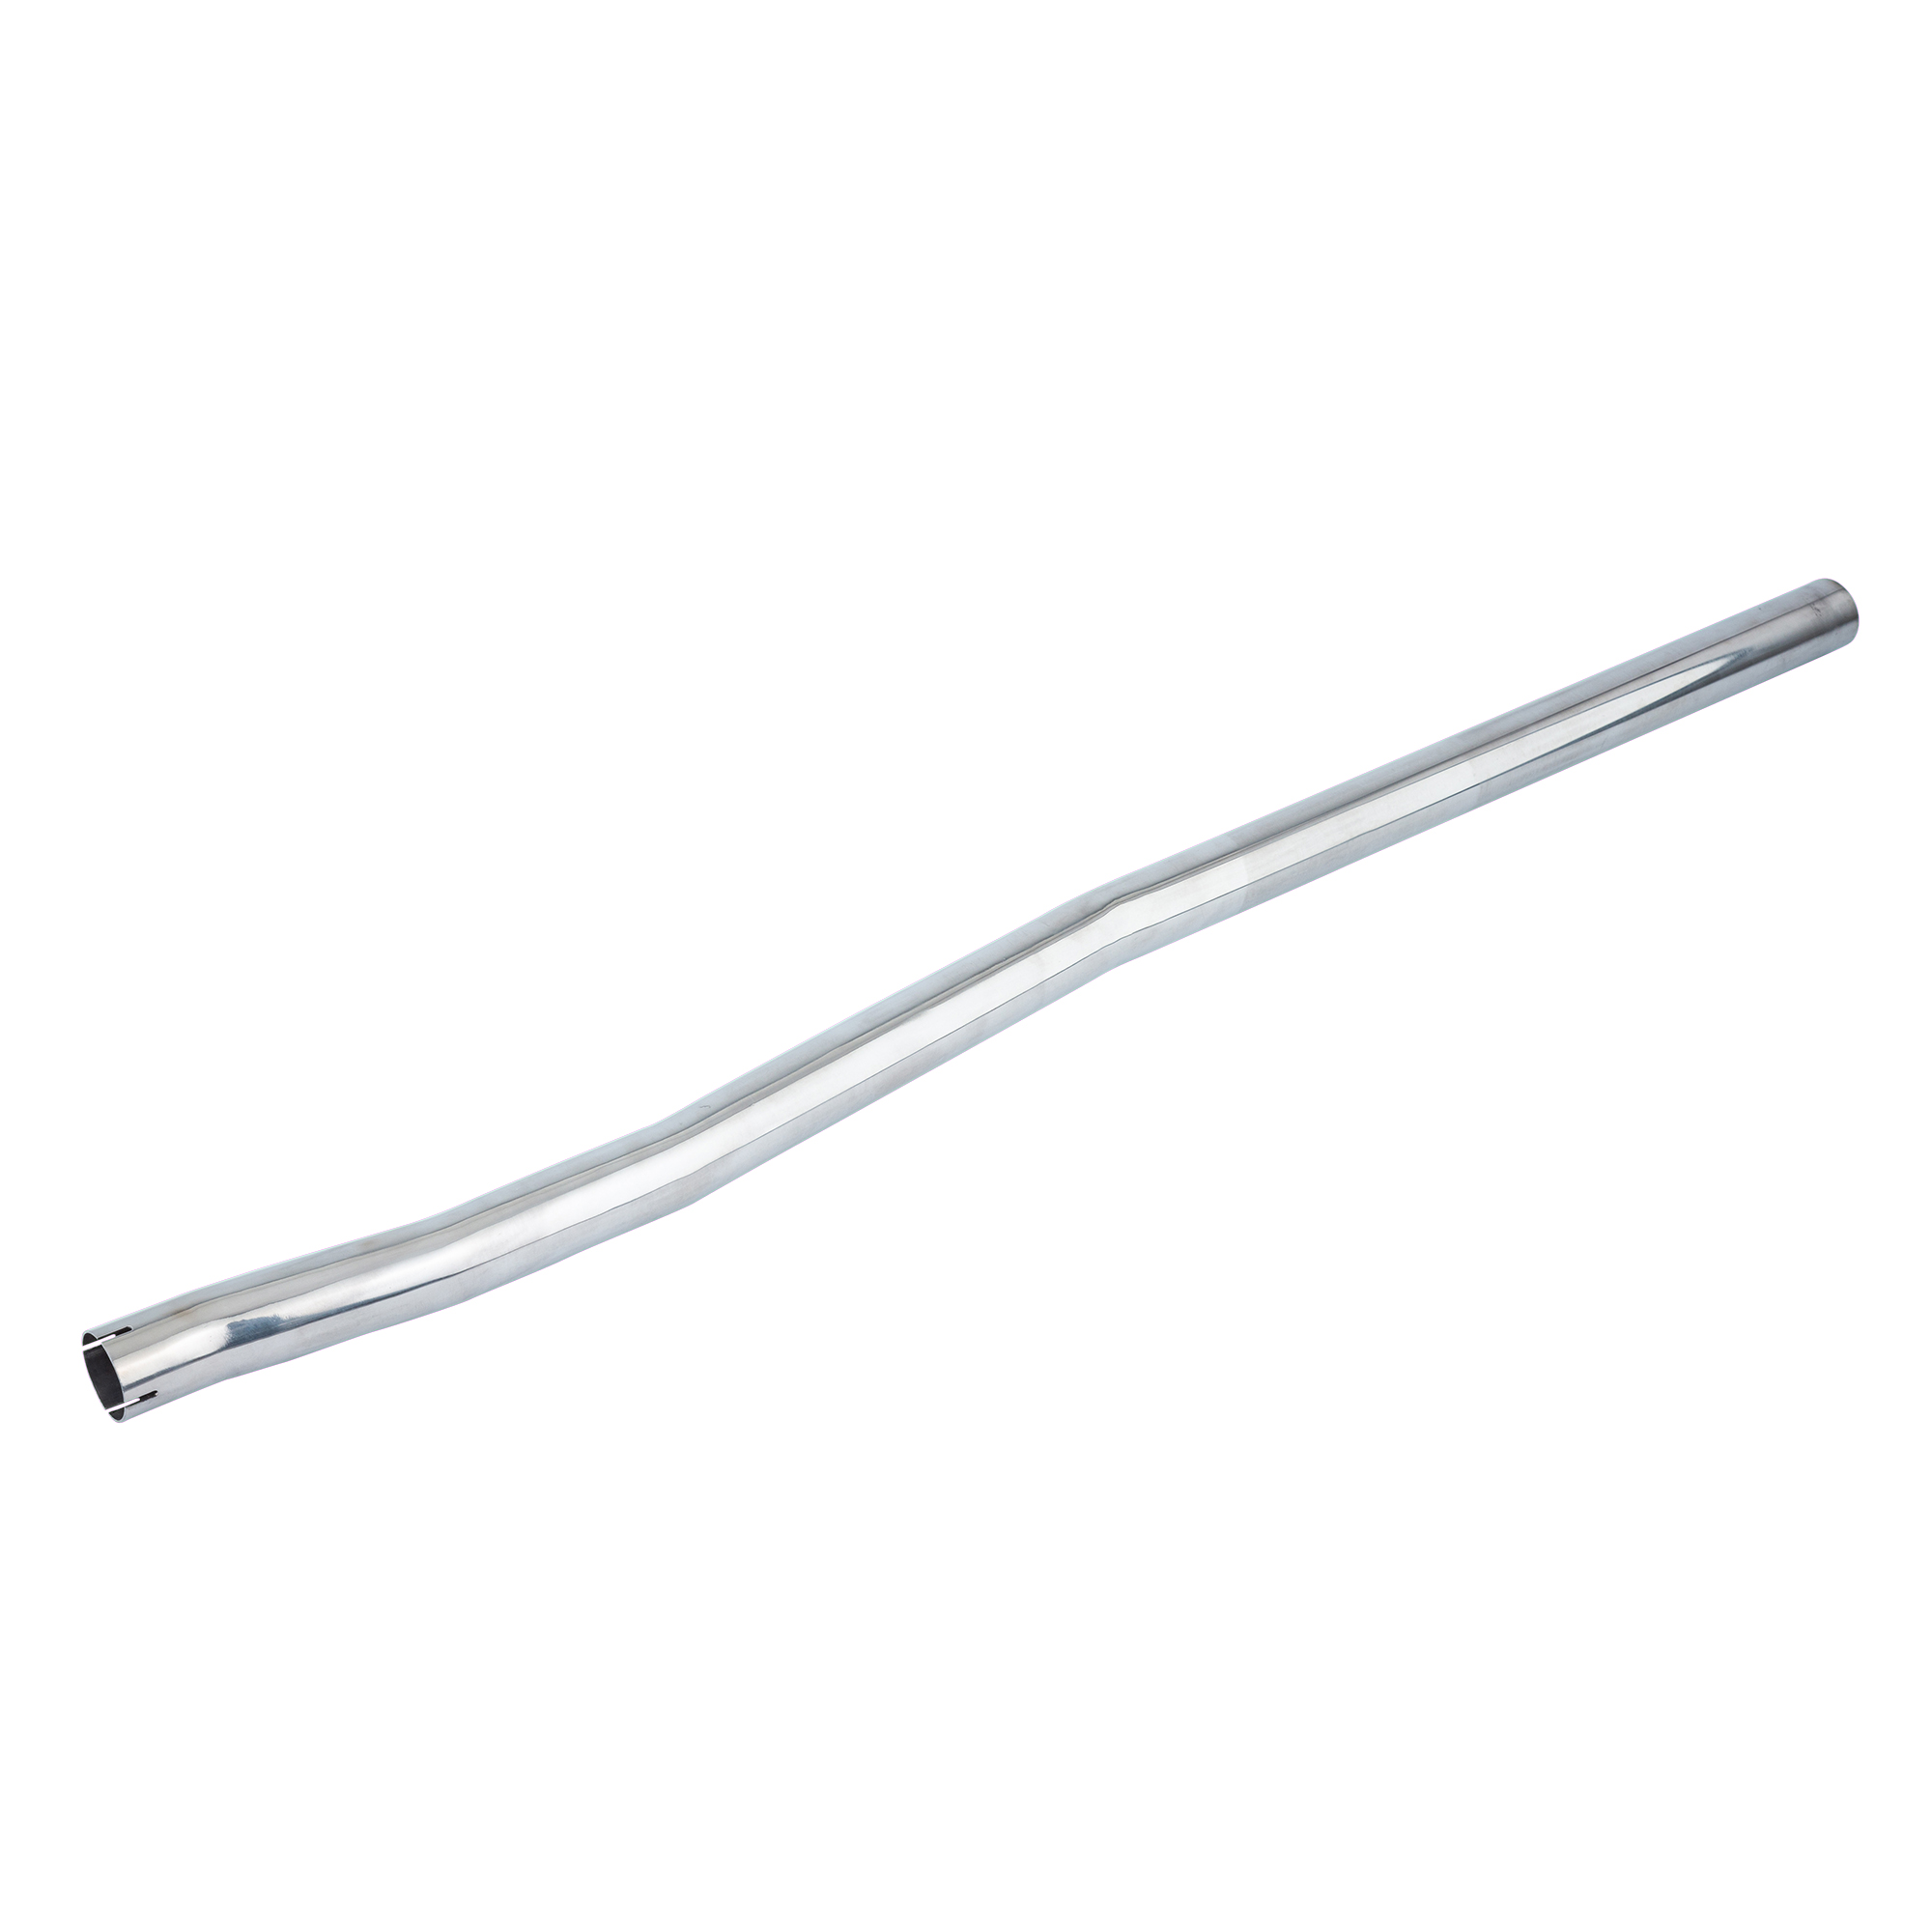 SUPERLITE® STAINLESS STEEL STRAIGHT THROUGH LINK PIPE